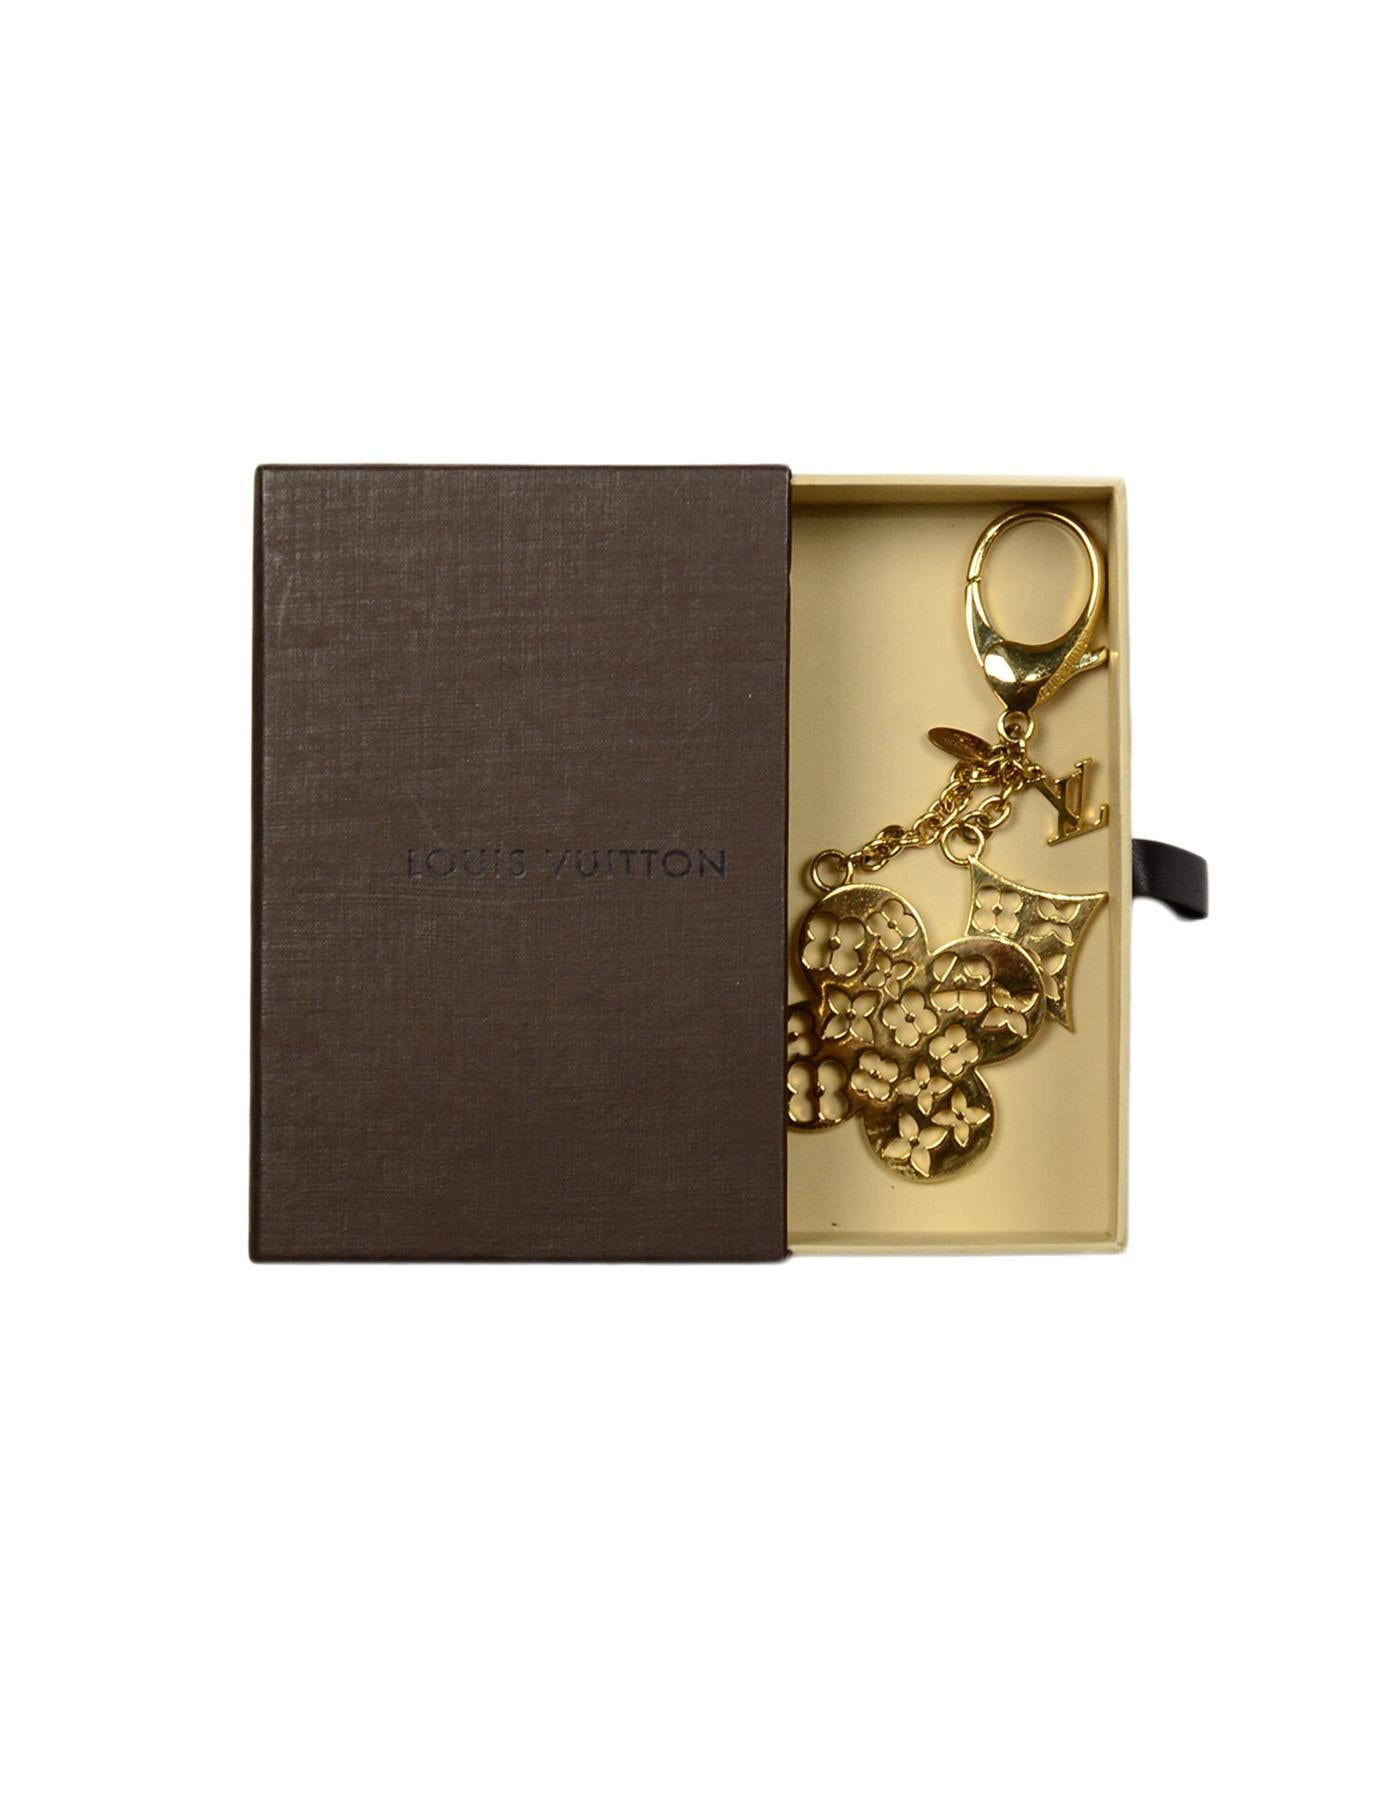 Louis Vuitton Goldtone Cutout Fleur Ivy Bag Charm/Key Chain

Made In: Italy
Year of Production: 2014
Color: Goldtone
Materials: Goldtone metal
Hallmarks: On hangtag- 